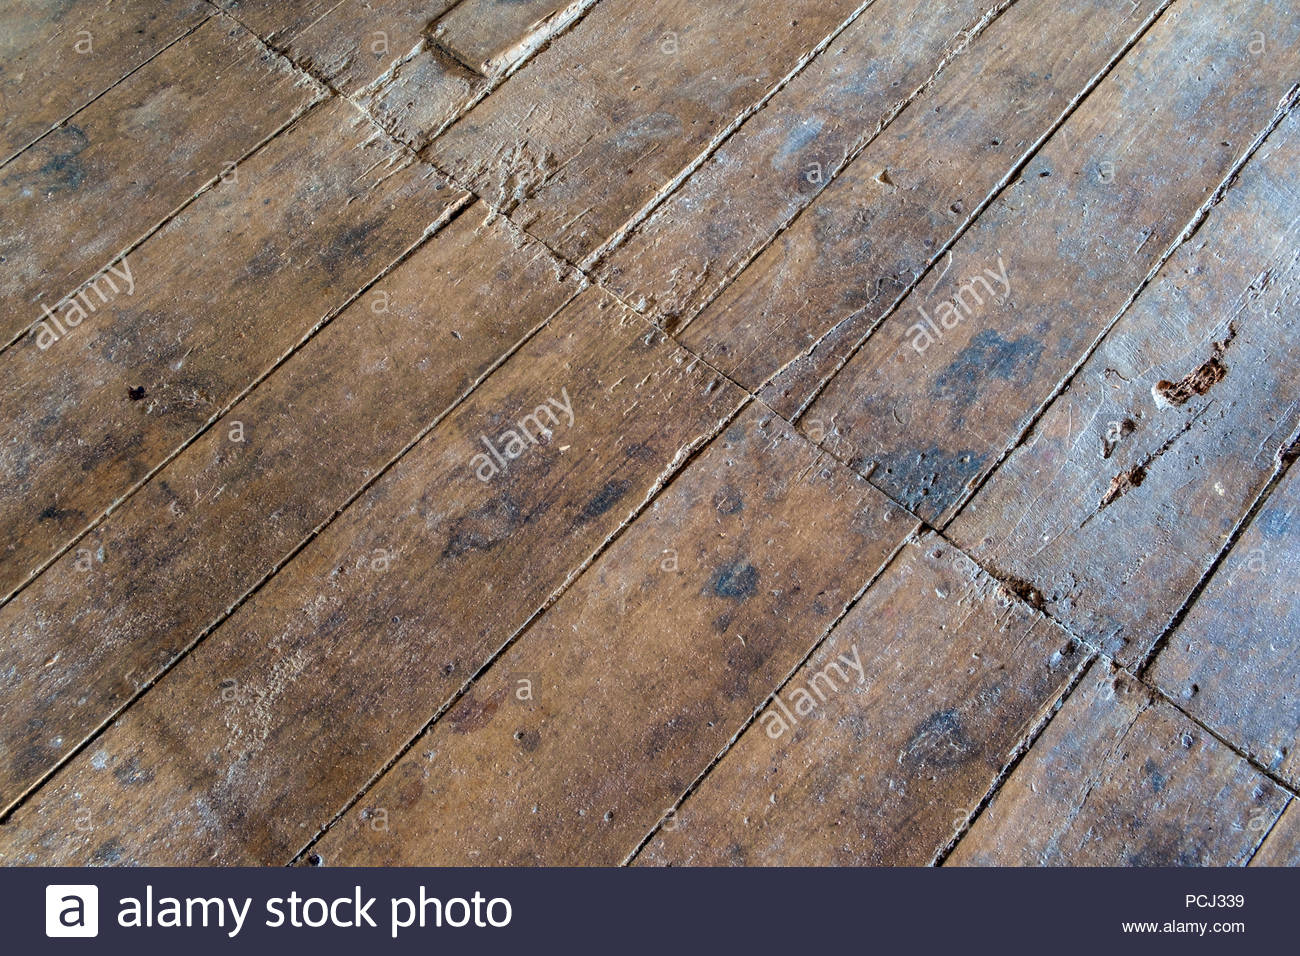 Massive old French farmhouse wooden floor boards after restoration 1300x956